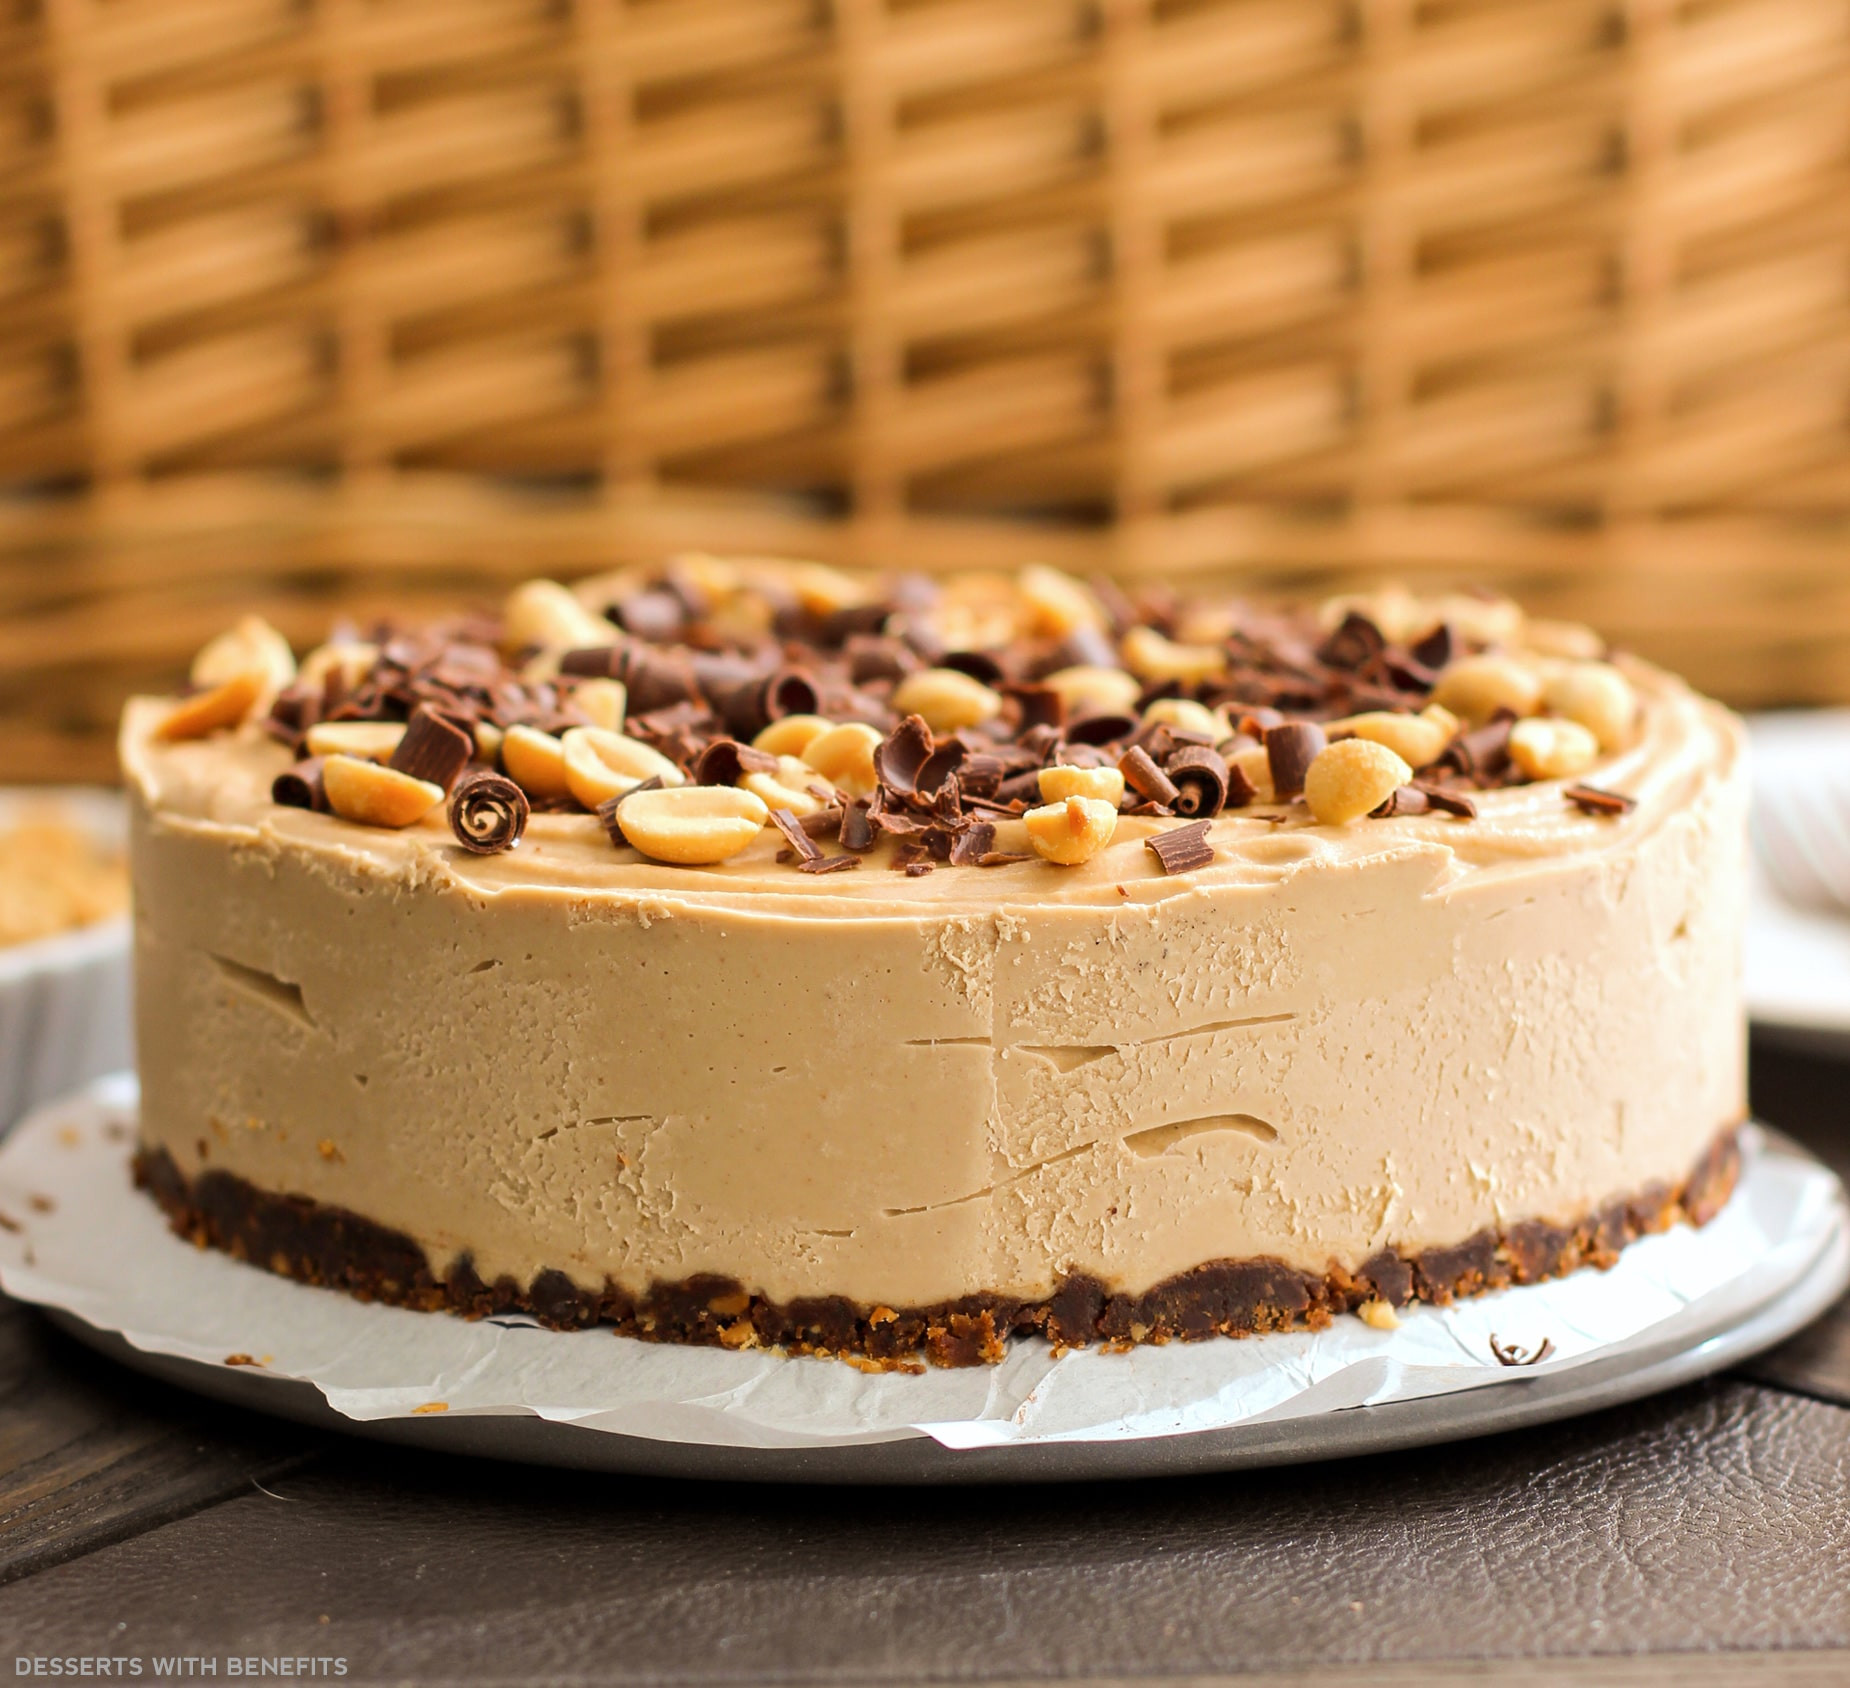 Sugar And Dairy Free Desserts
 Healthy Chocolate Peanut Butter Raw Cheesecake